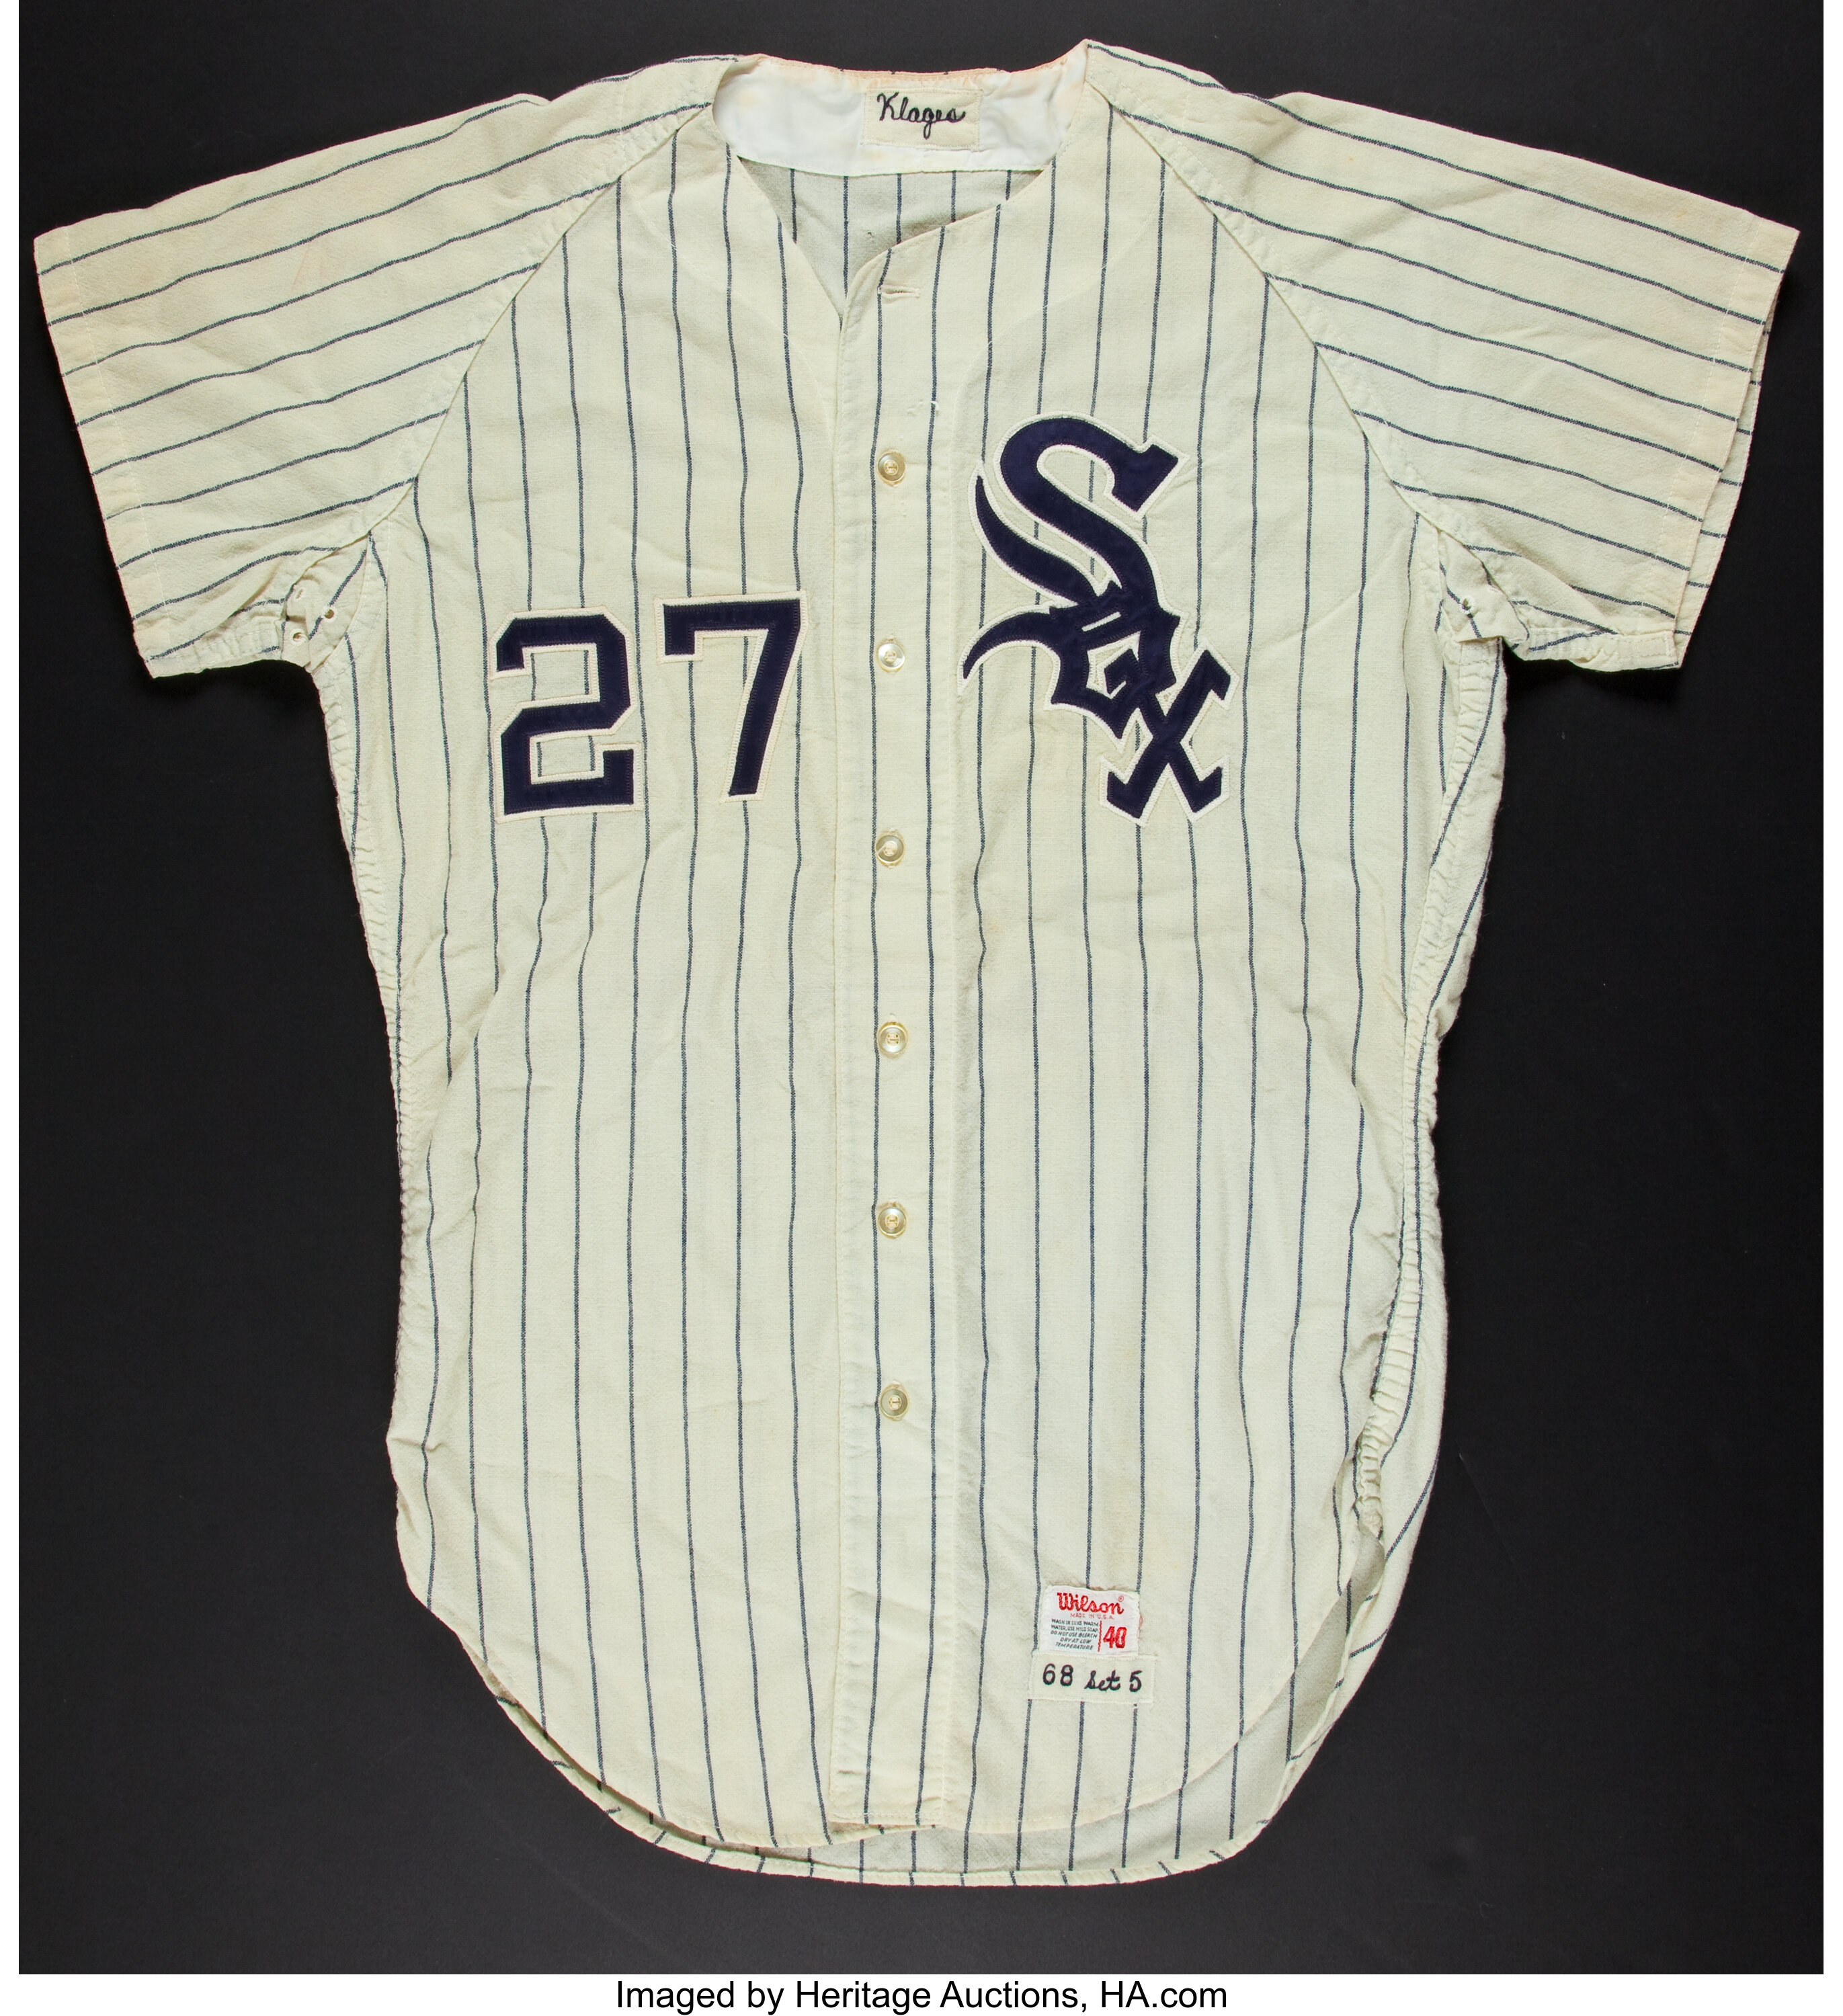 1968 Fred Klages Game Worn White Sox Flannel Jersey. Baseball